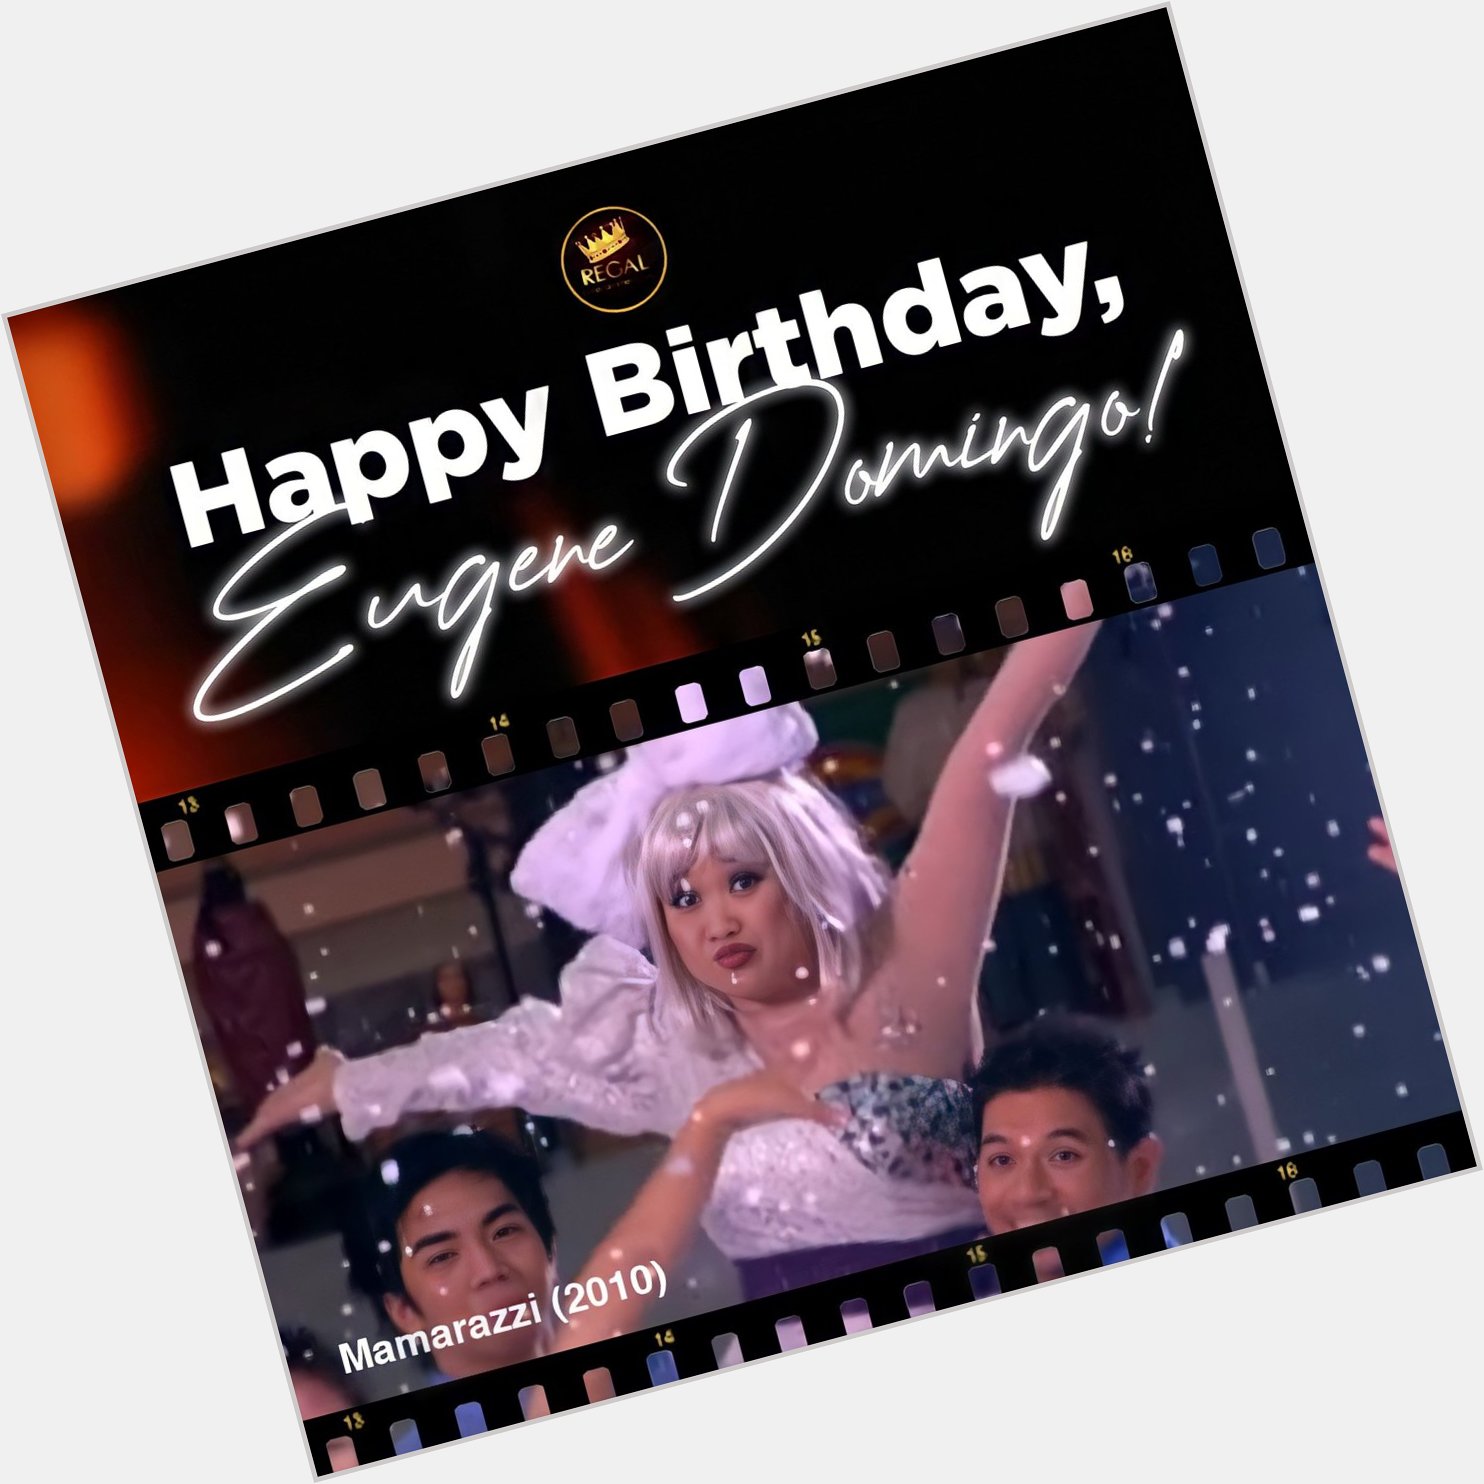 Happy Birthday, Eugene Domingo!  We wish you all the best in life! From your Regal Family! 